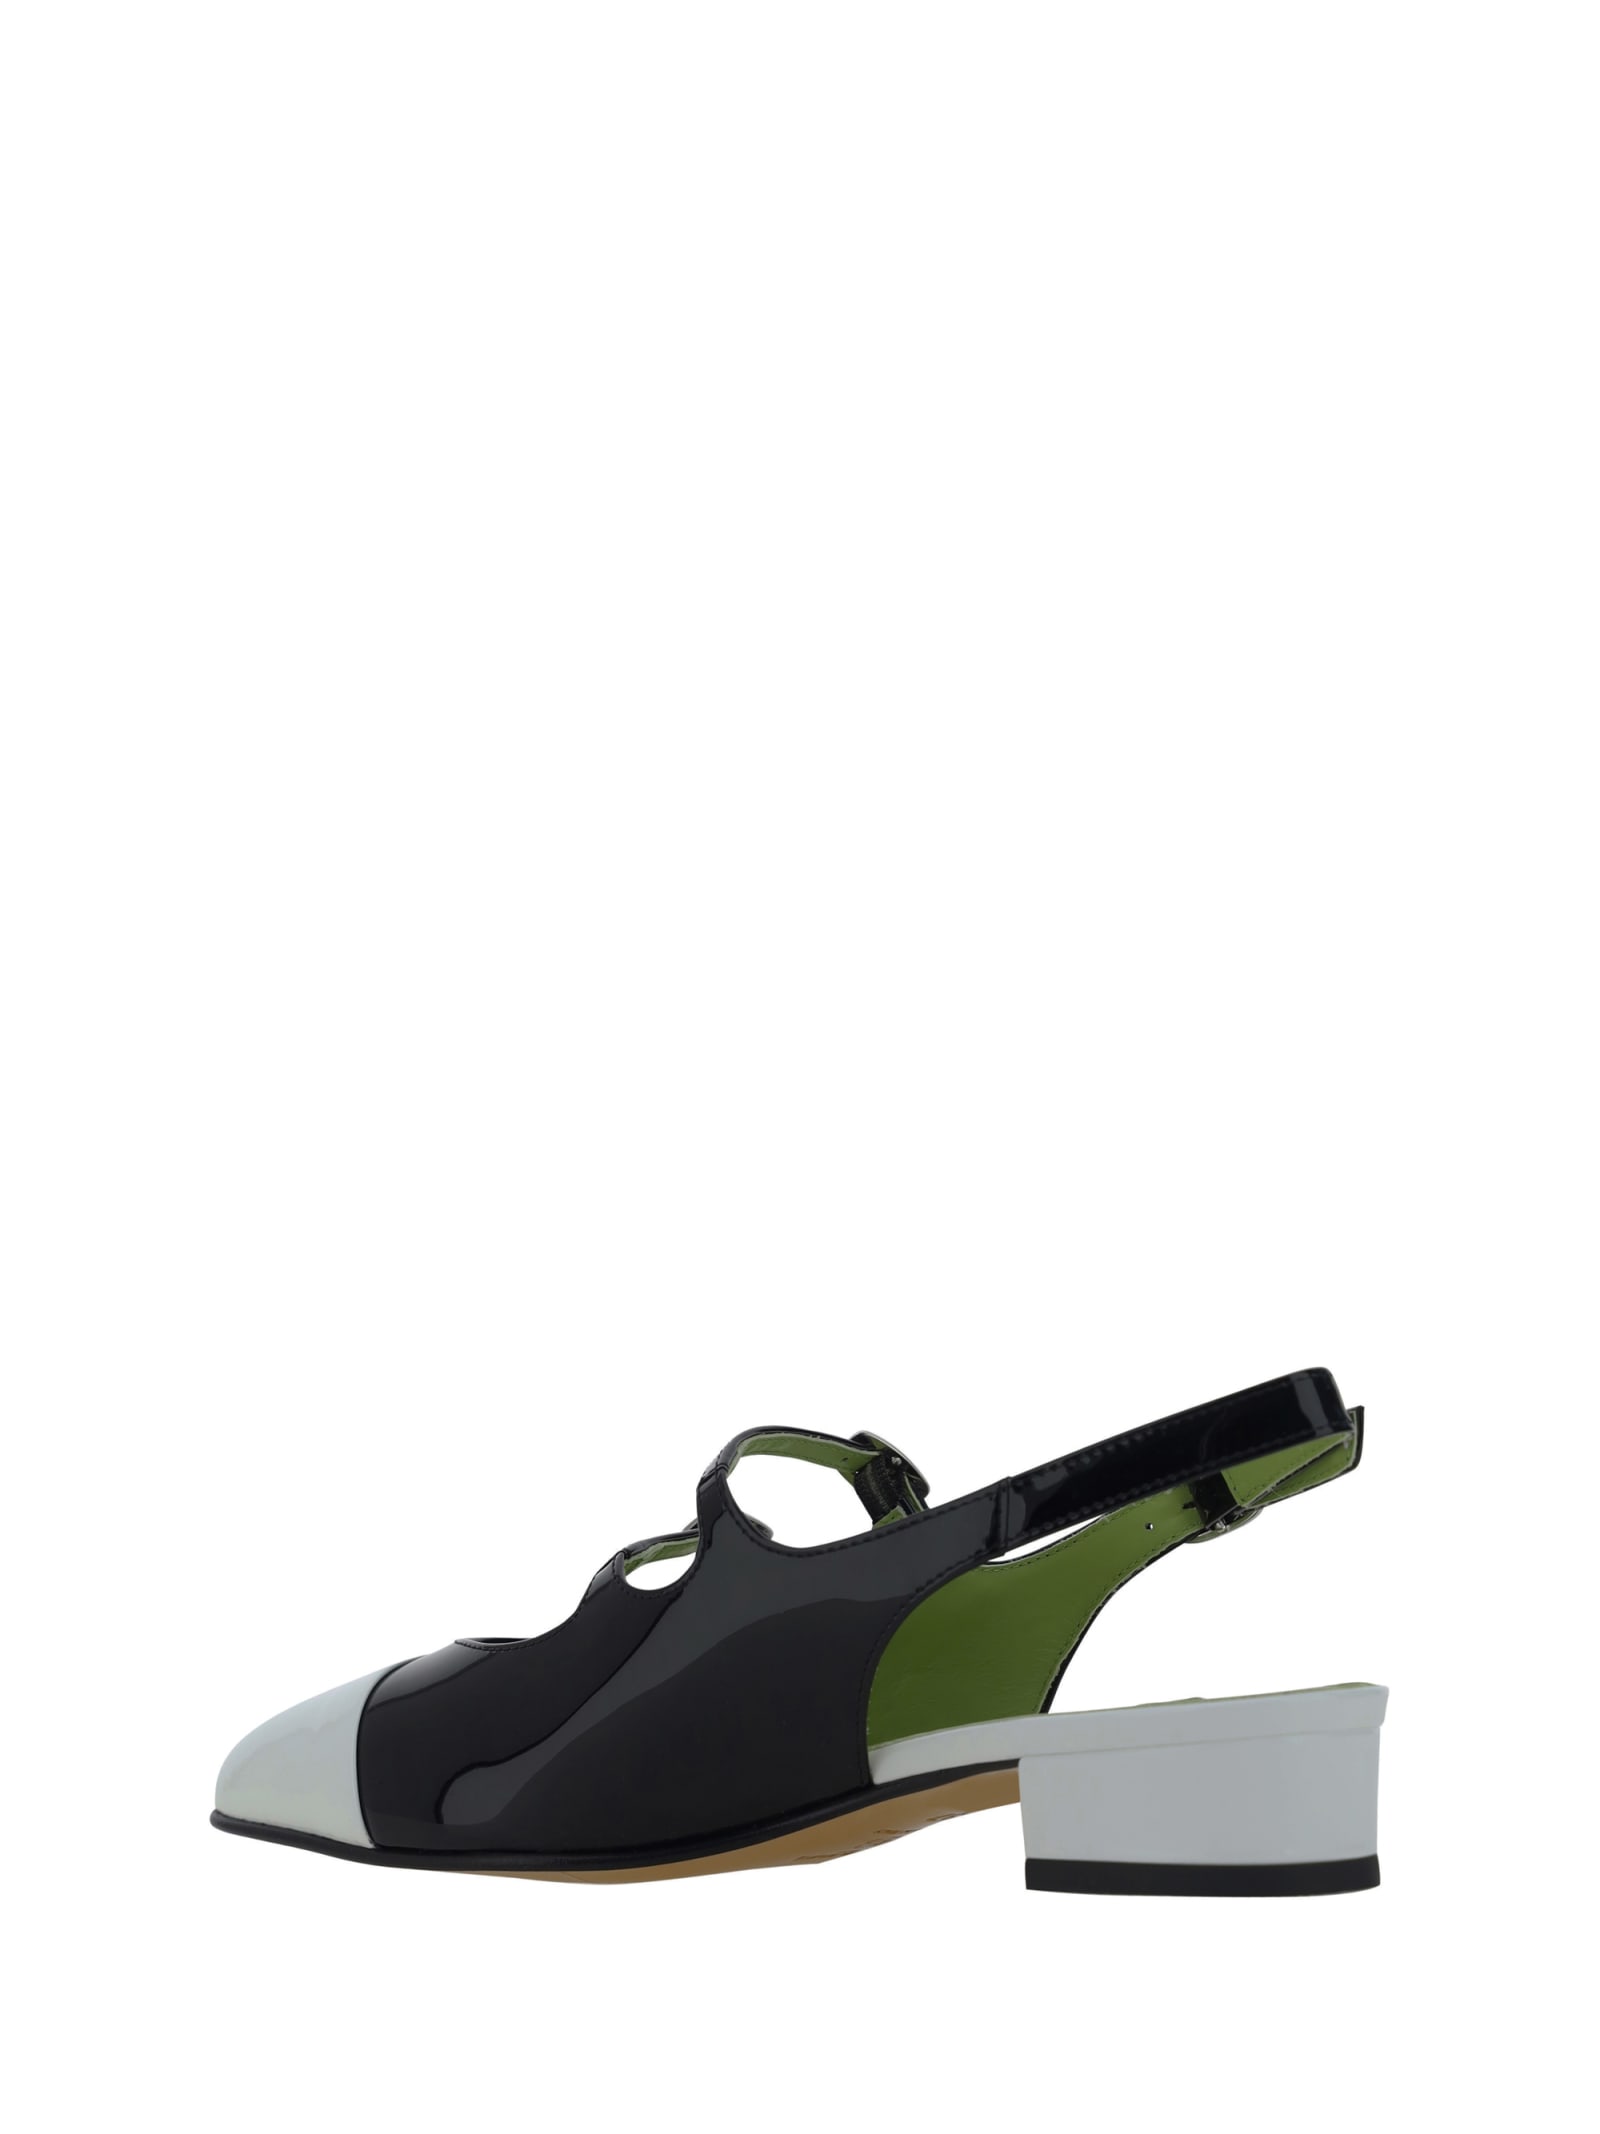 Shop Carel Abricot Pumps In Black And White